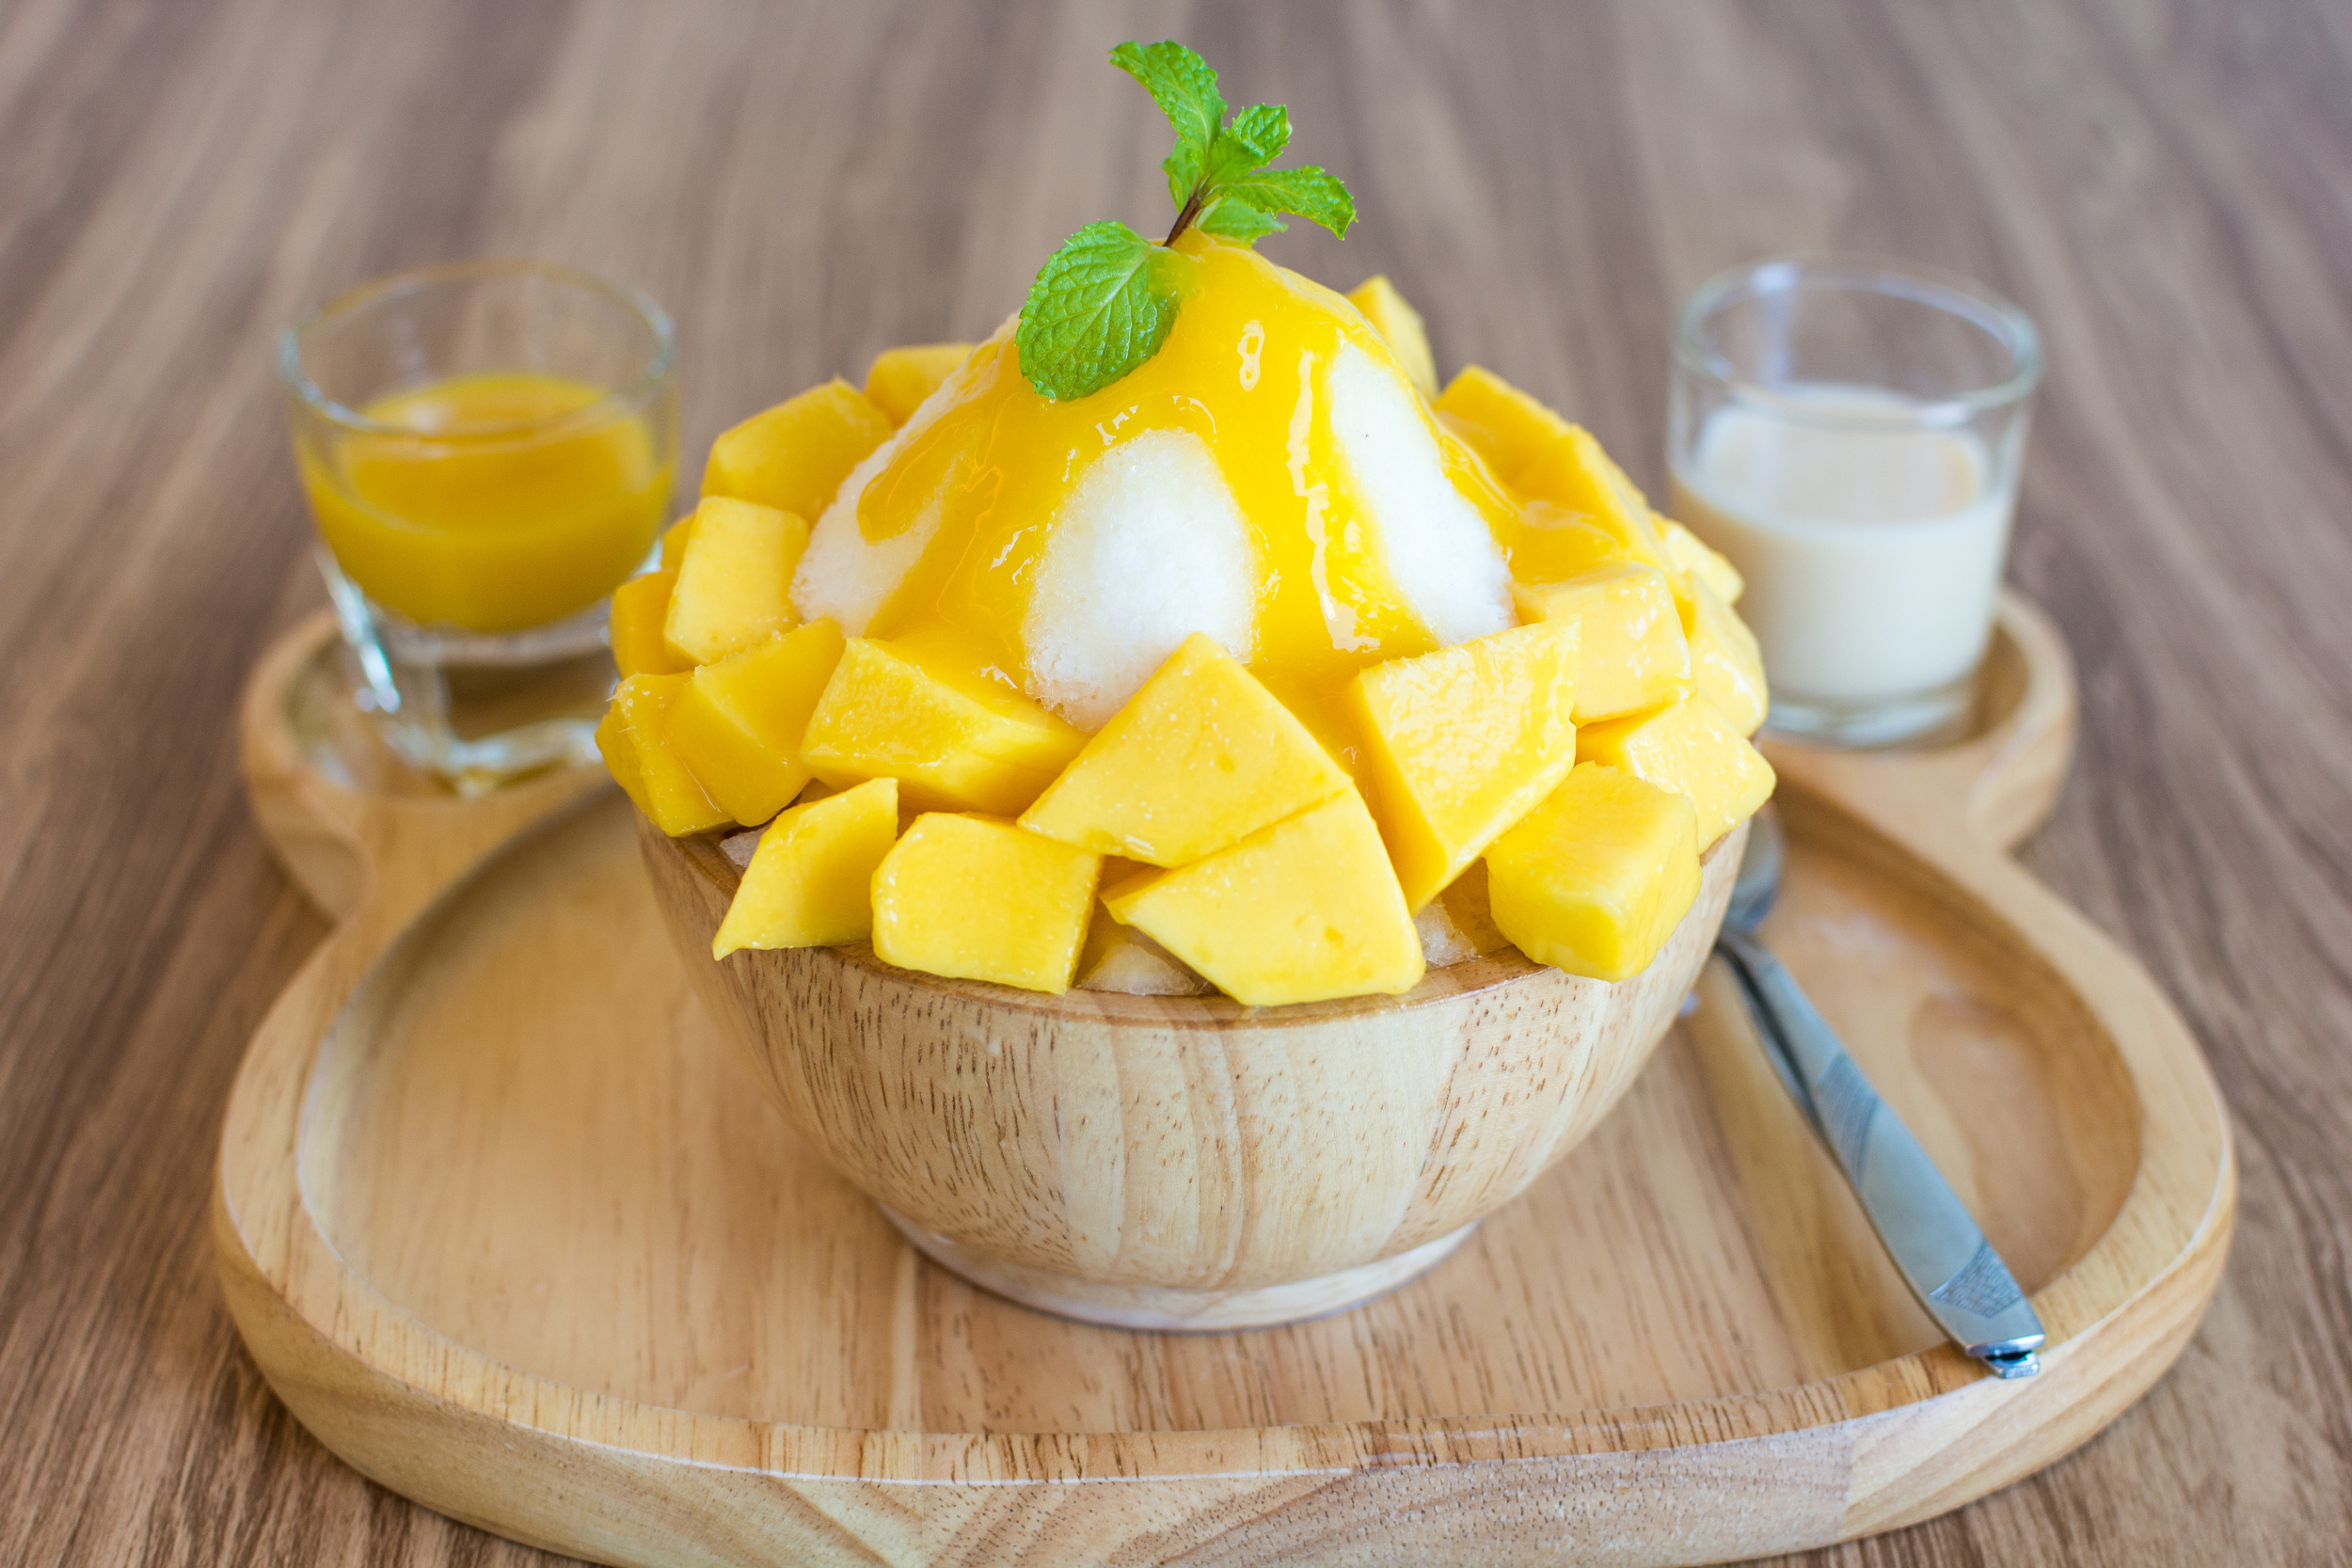 <p>You’ve probably had Italian shaved ice. You may have had Hawaiian shave ice. But have you tried Korean shaved ice? It’s milk-based and includes toppings like fruit, fruit syrup, sweetened condensed milk, and even beans! <a href="https://www.beyondkimchee.com/mango-shaved-ice/"><span>This mango bingsu recipe from Beyond Kimchee</span></a> uses red bean paste and doesn’t require a special machine — just a blender and a freezer. </p><p>You may also like: <a href='https://www.yardbarker.com/lifestyle/articles/15_unexpected_places_to_add_a_plant_in_your_home/s1__38360717'>15 unexpected places to add a plant in your home</a></p>